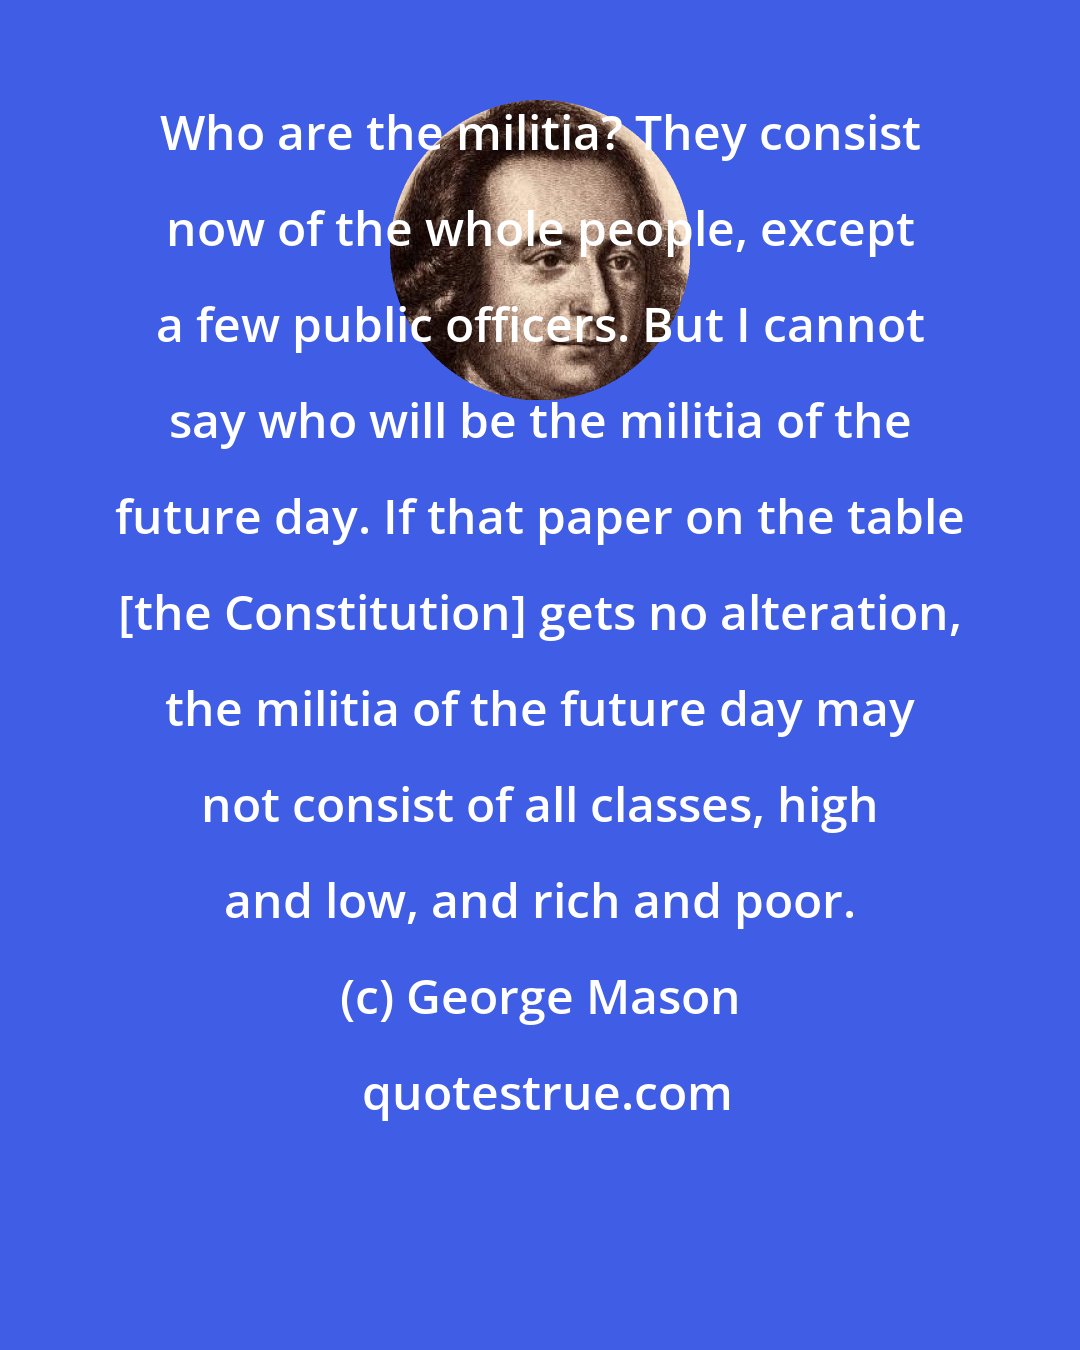 George Mason: Who are the militia? They consist now of the whole people, except a few public officers. But I cannot say who will be the militia of the future day. If that paper on the table [the Constitution] gets no alteration, the militia of the future day may not consist of all classes, high and low, and rich and poor.